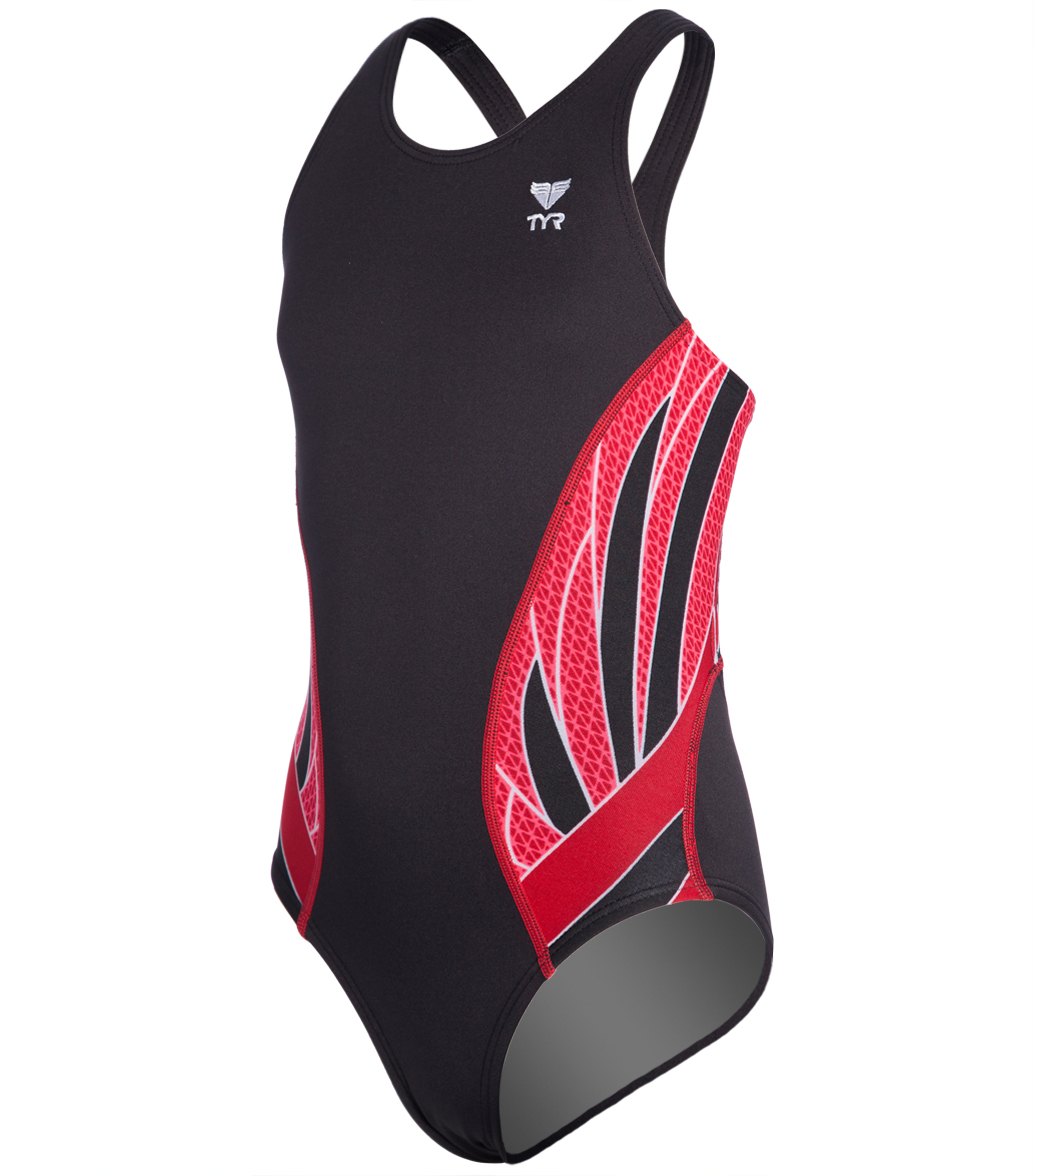 TYR Girls' Phoenix Maxfit One Piece Swimsuit - Black/Red 22 Polyester/Spandex - Swimoutlet.com